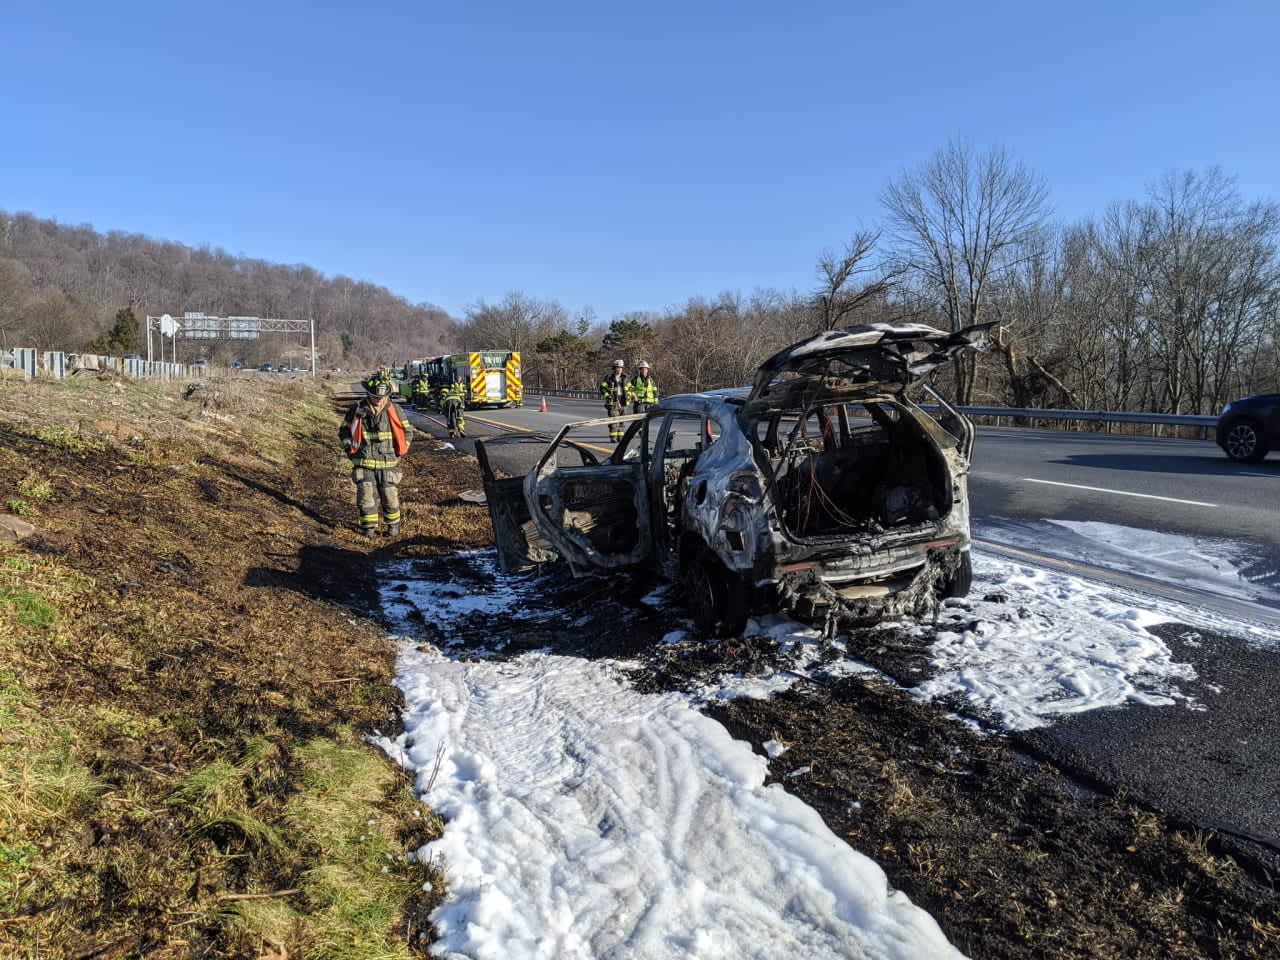 A car fire on 78 Sunday spread to the roadway and some nearby brush